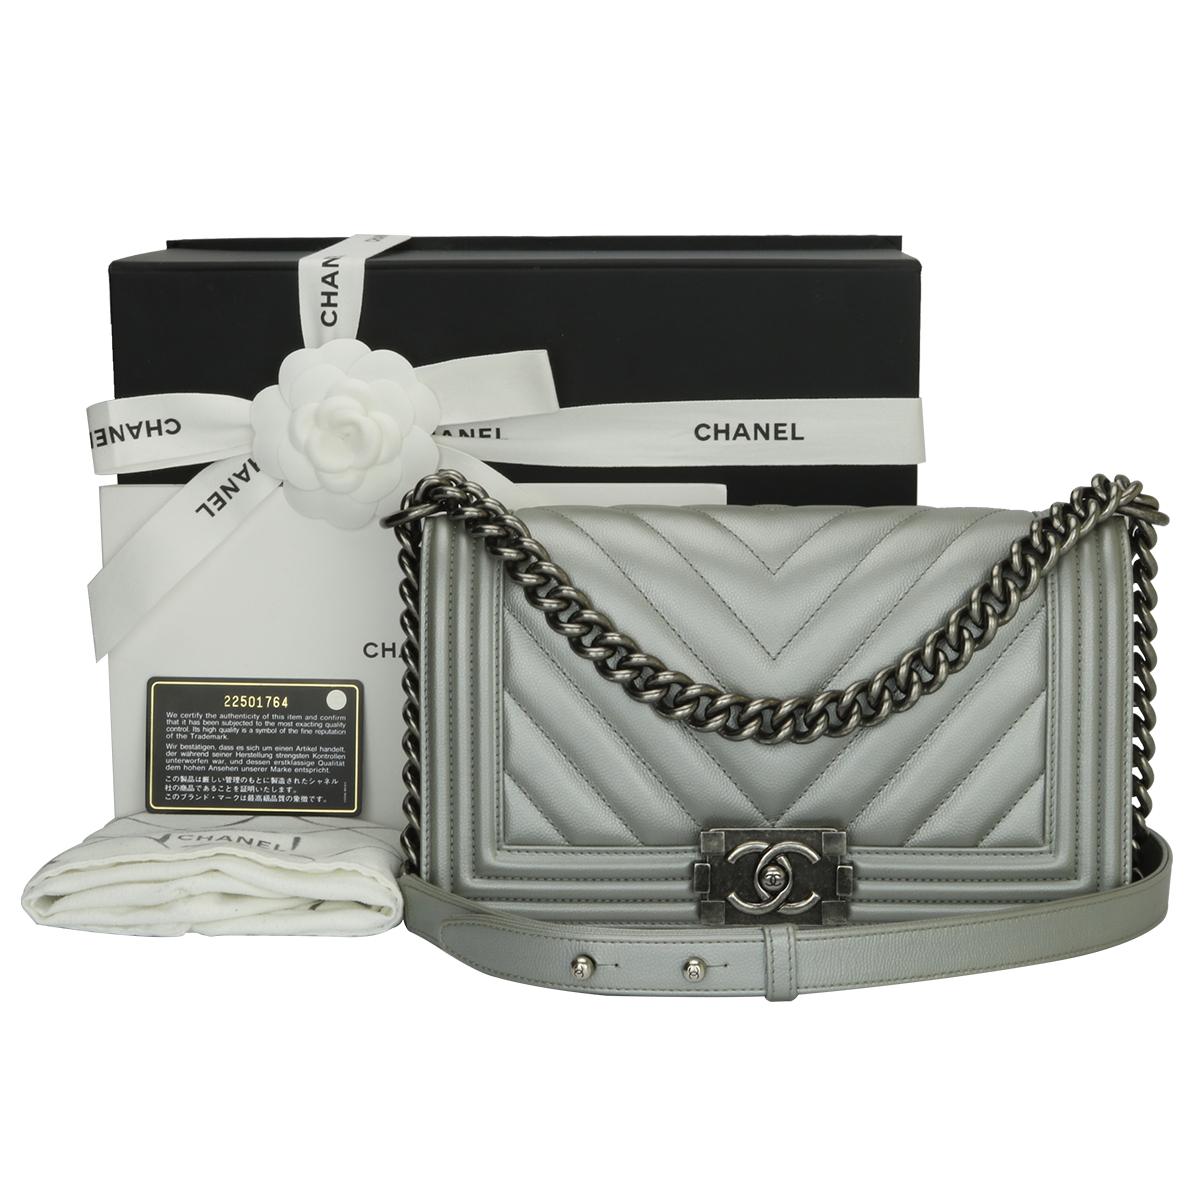 Authentic CHANEL Old Medium Chevron Boy Bag Silver Caviar with Ruthenium Hardware 2016.

This stunning bag is still in a mint condition; it still keeps its original shape and the hardware still very shiny.

Exterior Condition: Mint condition,